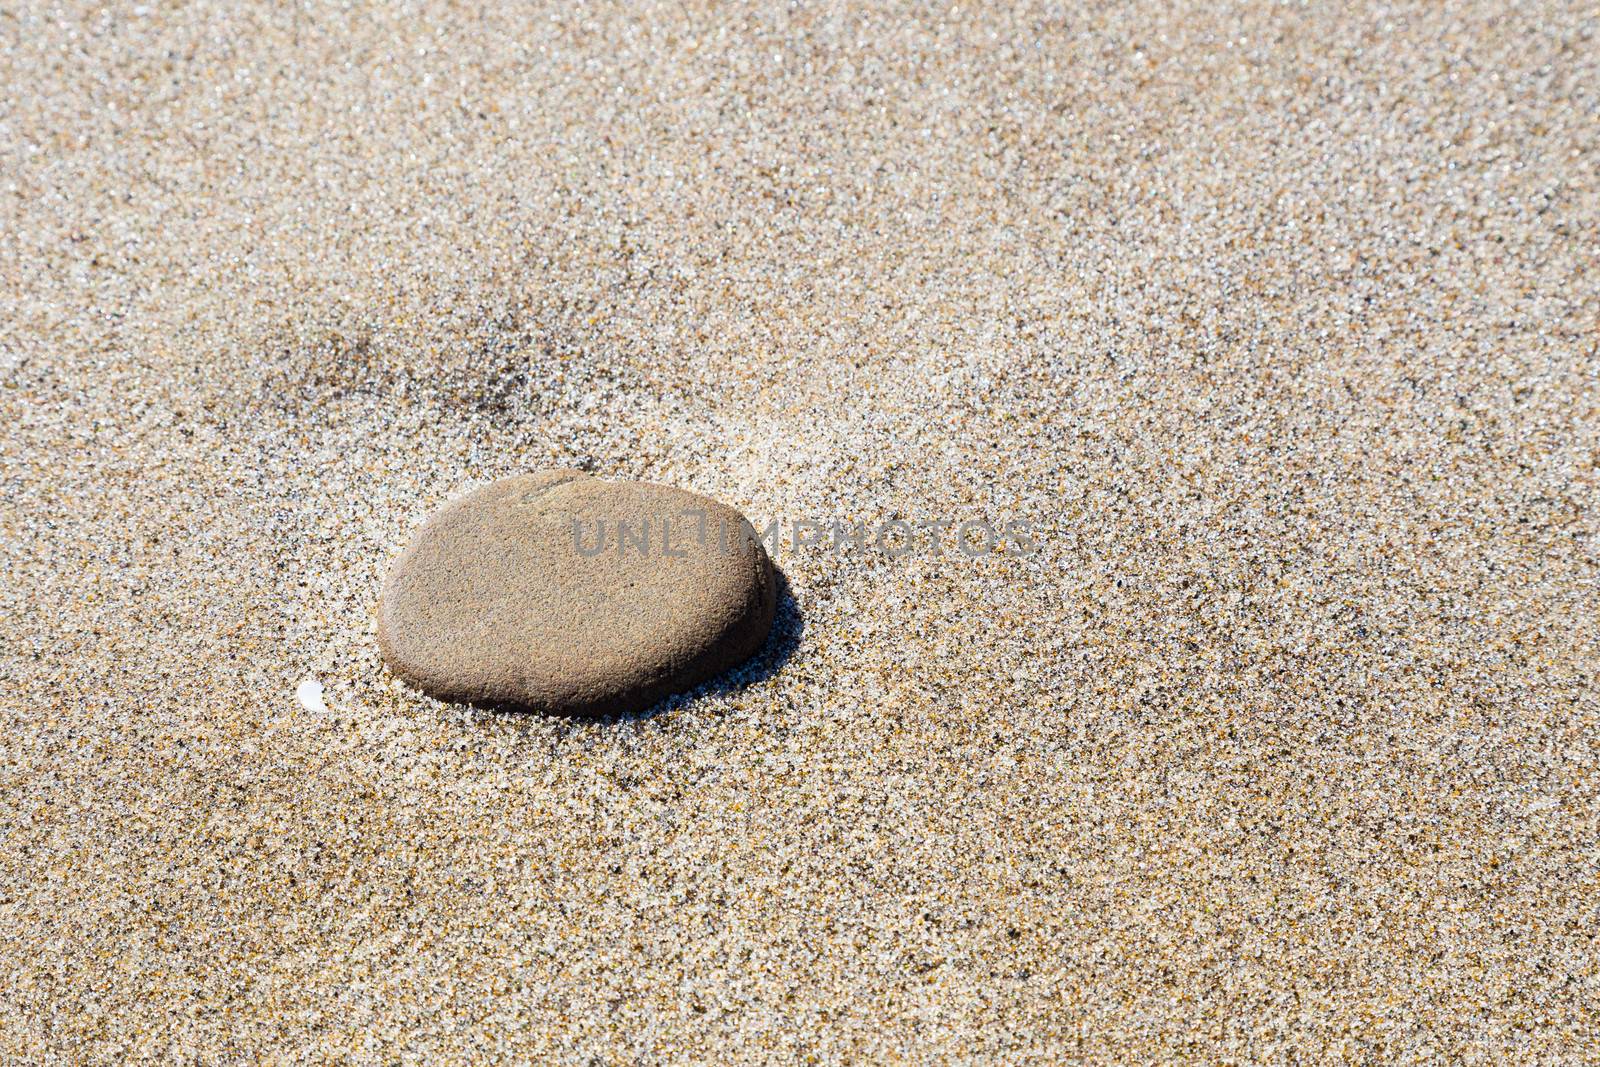 A large stone sits on some fine sand at the beach in Oregon along the coast.